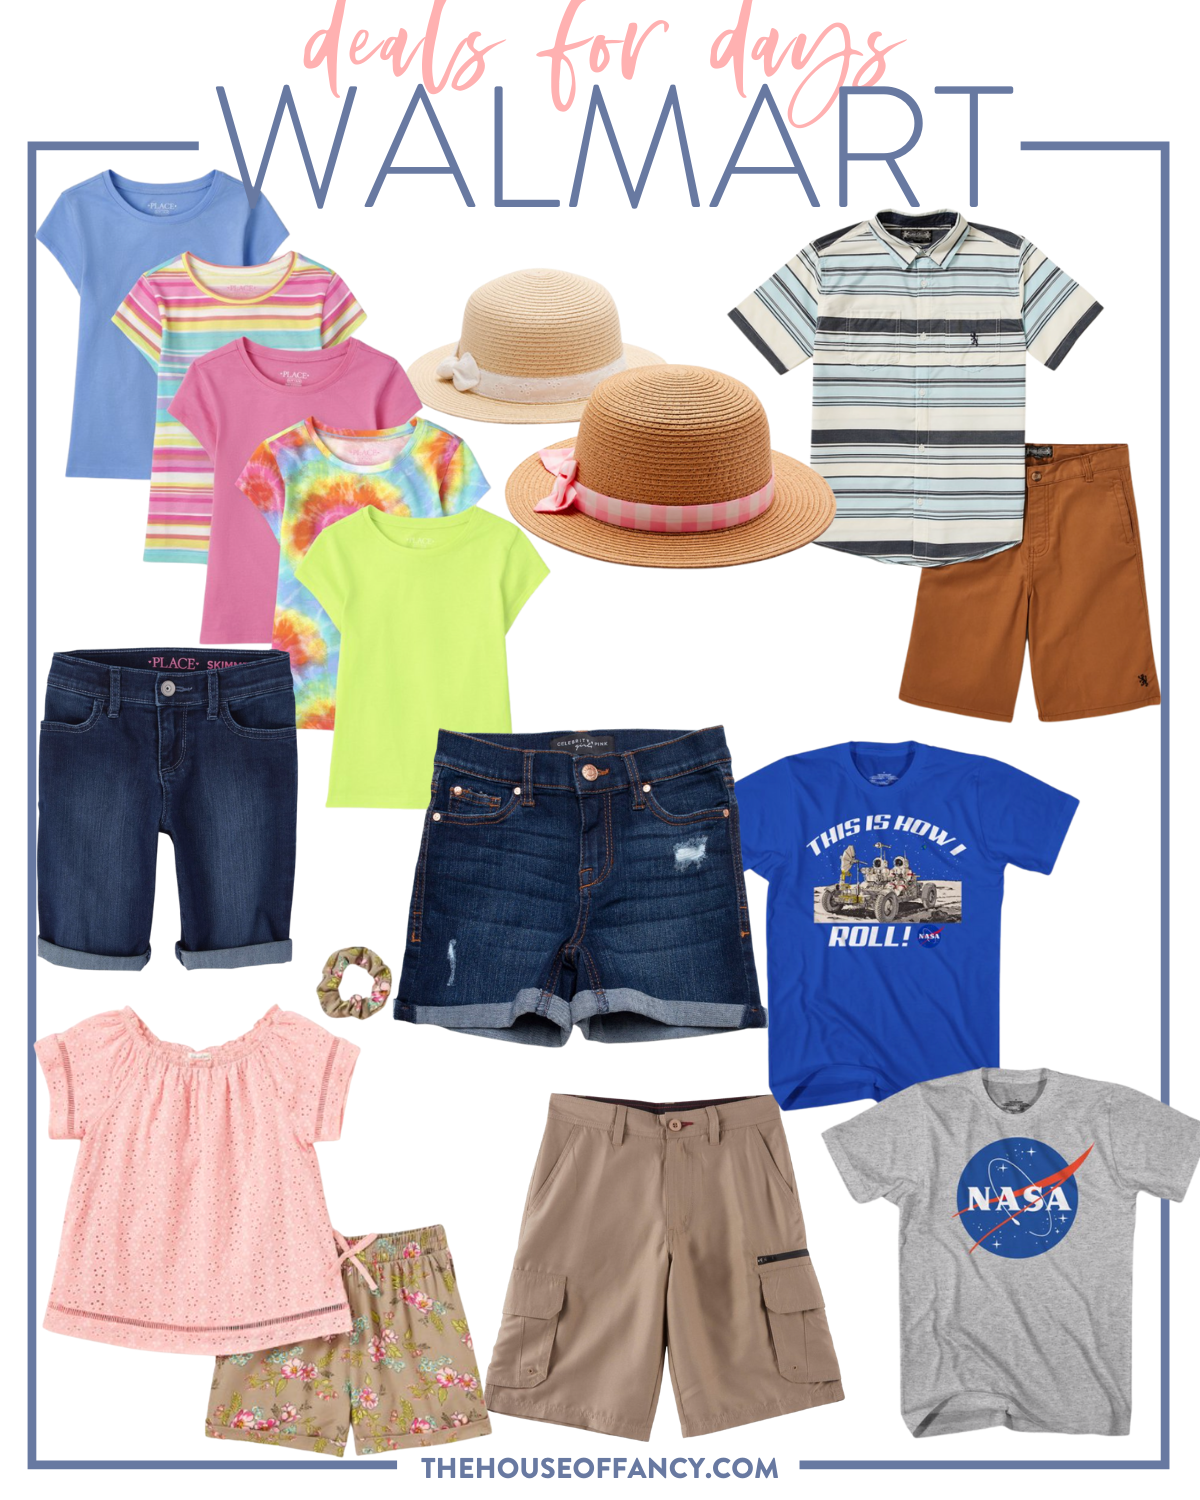 Walmart Deals for Days by popular Houston fashion blog, The House of Fancy: collage image of girls t-shirts, denim shorts, nasa print t-shirt, brown shorts, cream, black and blue stripe button up shirt, floral print scrunchi, pink eyelet shirt, and floral print shorts.